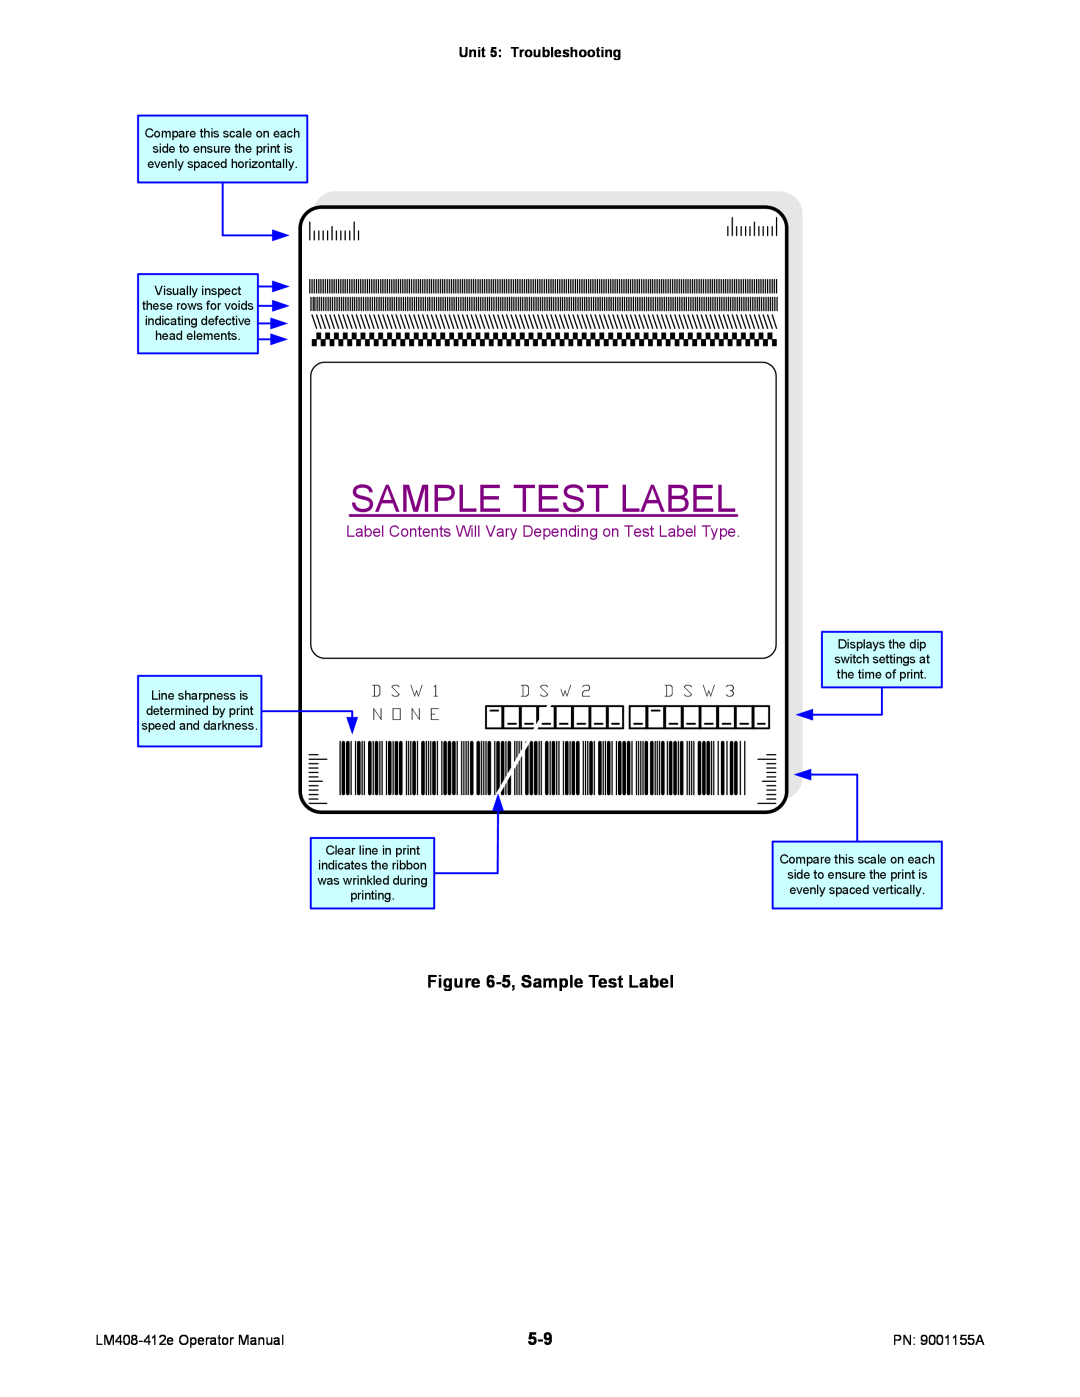 SATO LM408/412E Sample Test Label, Label Contents Will Vary Depending on Test Label Type, D S W, N O N E, head elements 